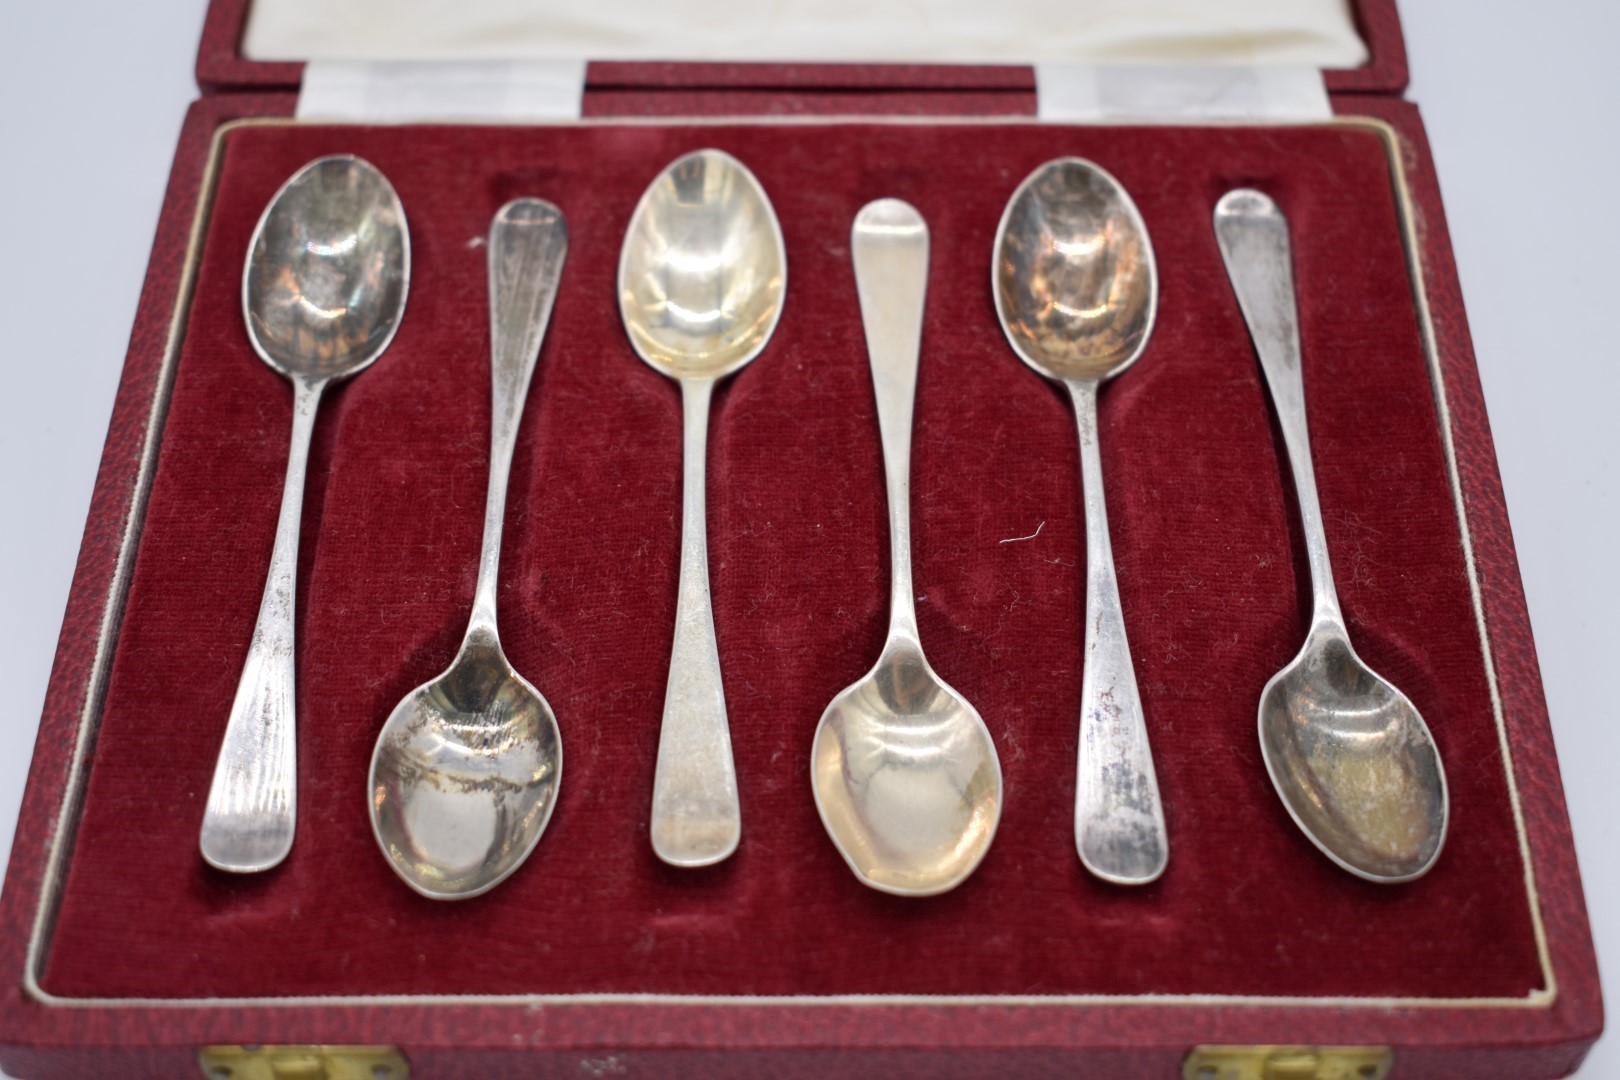 A cased set of six Edwardian silver coffee spoons, by Robert Pringle & Sons, Sheffield 1905, 43g. - Image 2 of 3